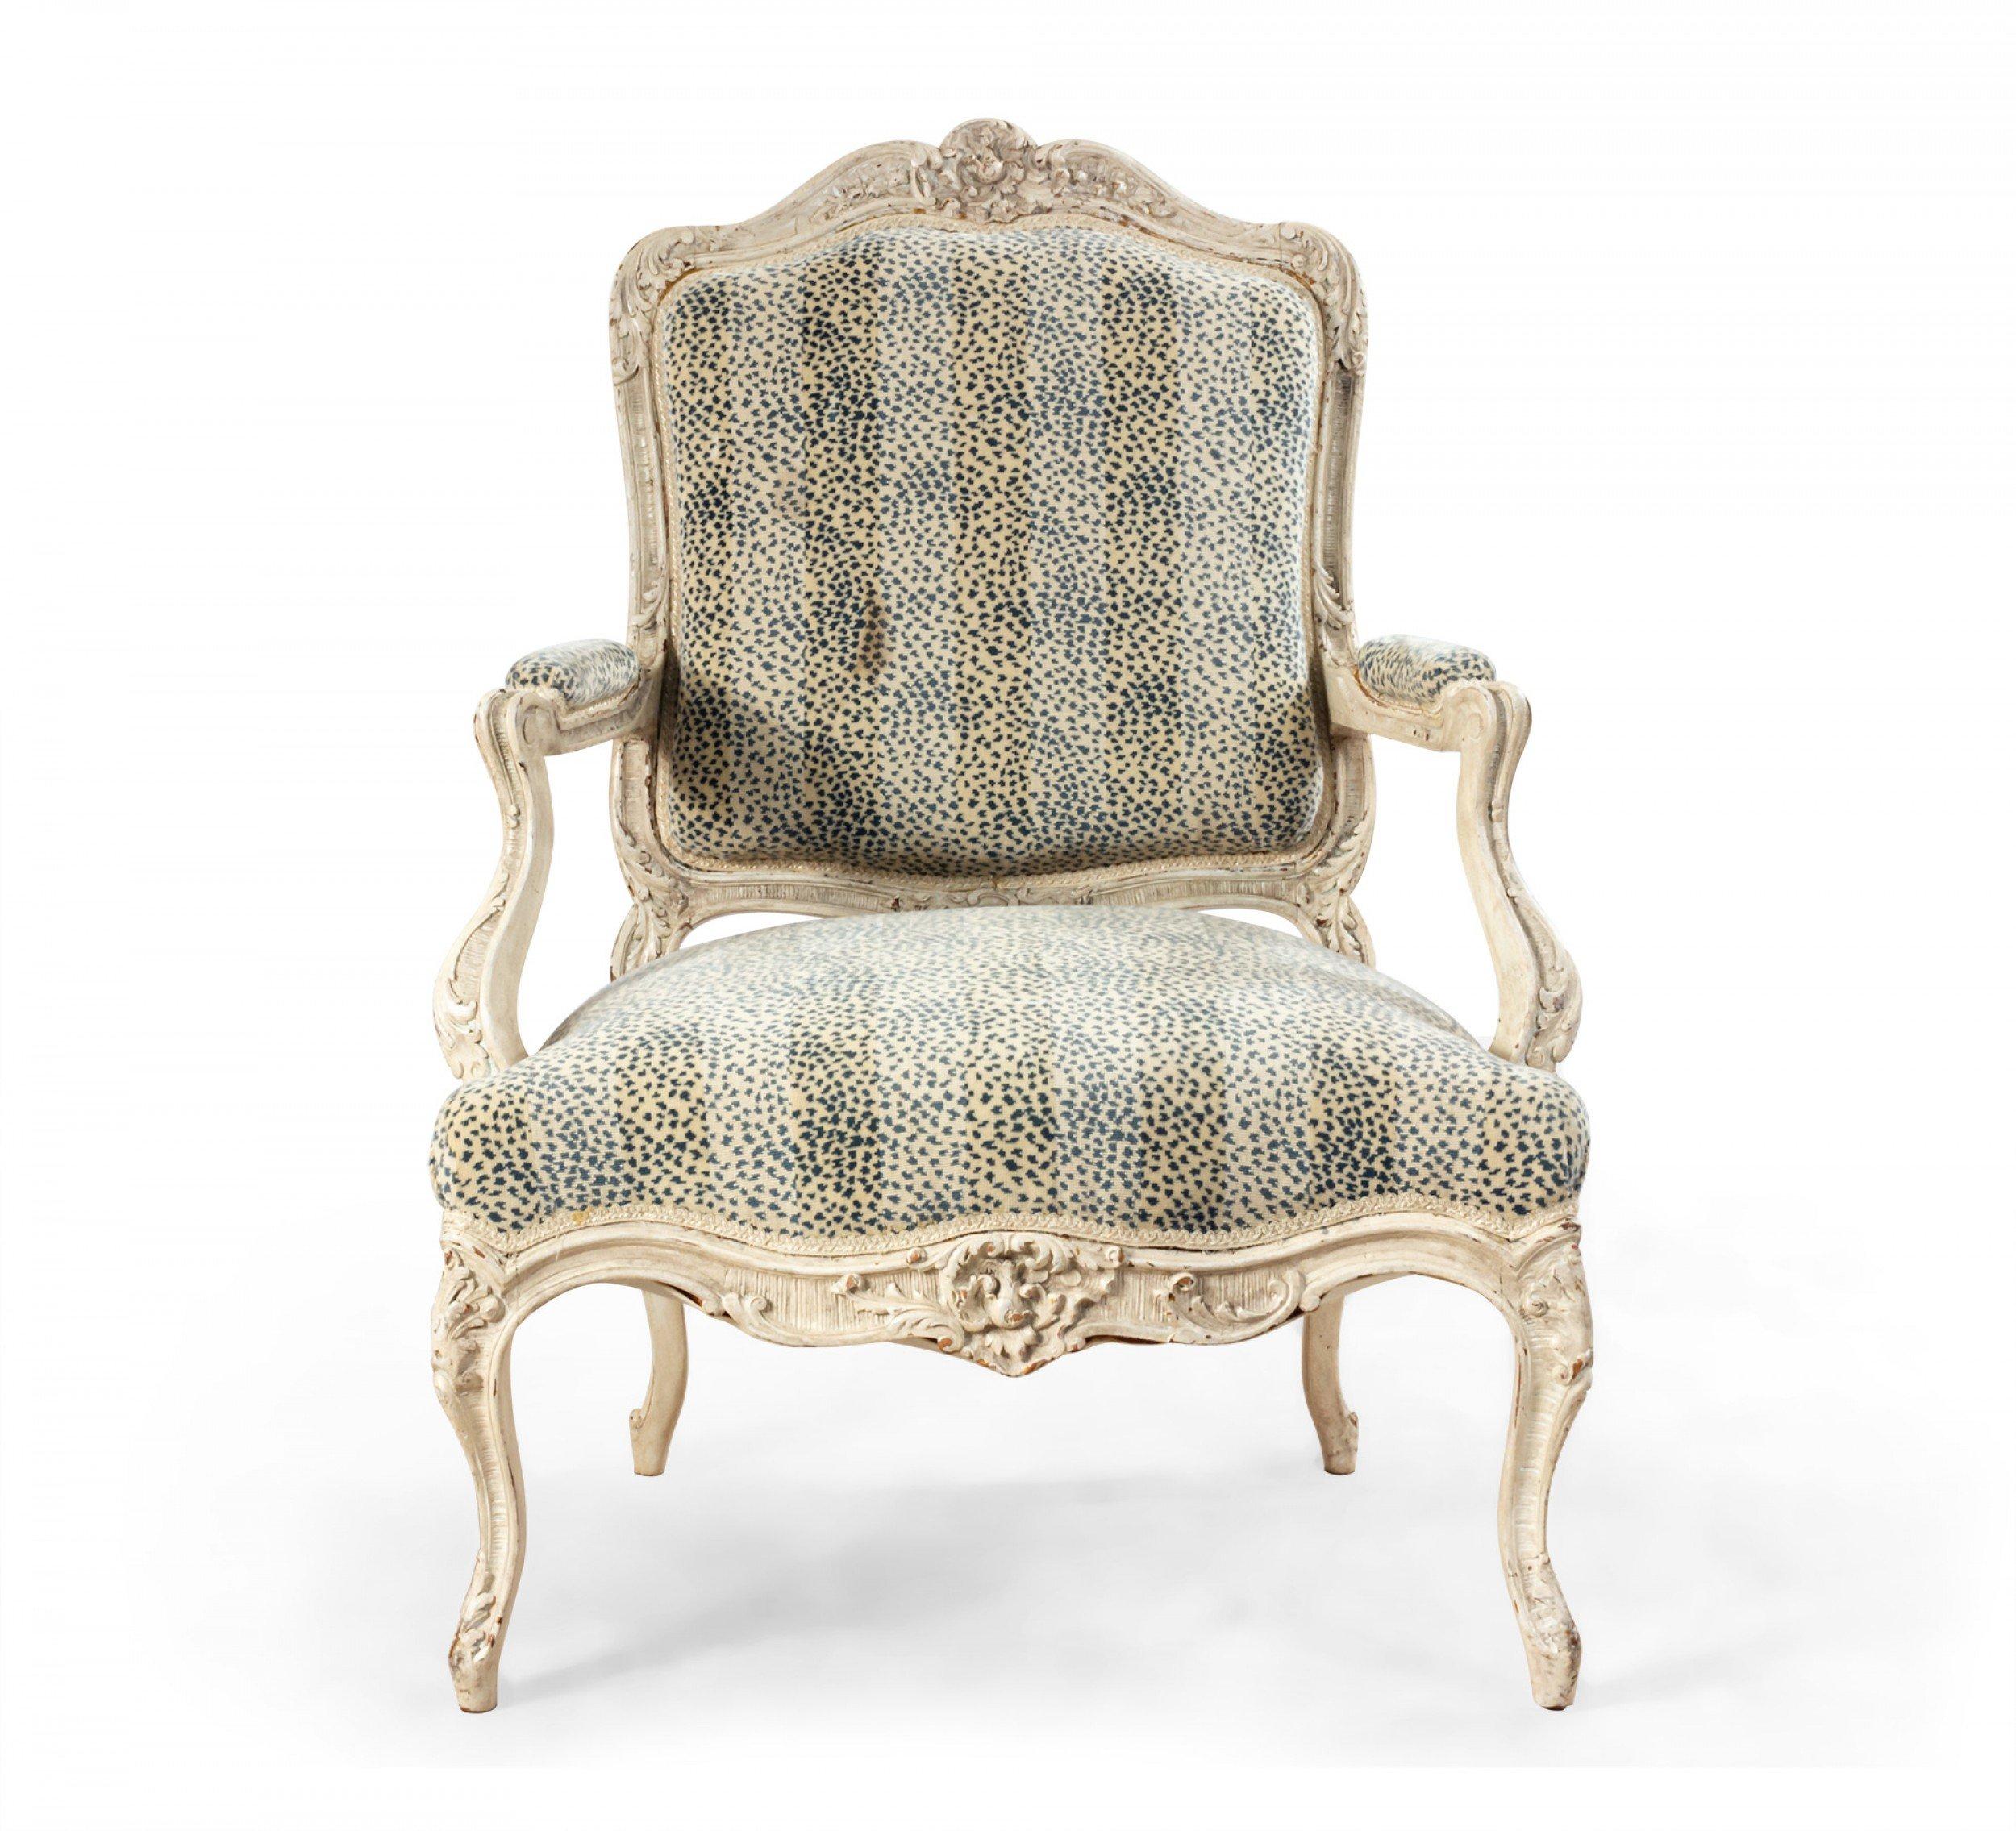 Pair of French Louis XV style white painted and carved oversized armchairs with blue and gray spotted and striped upholstery.